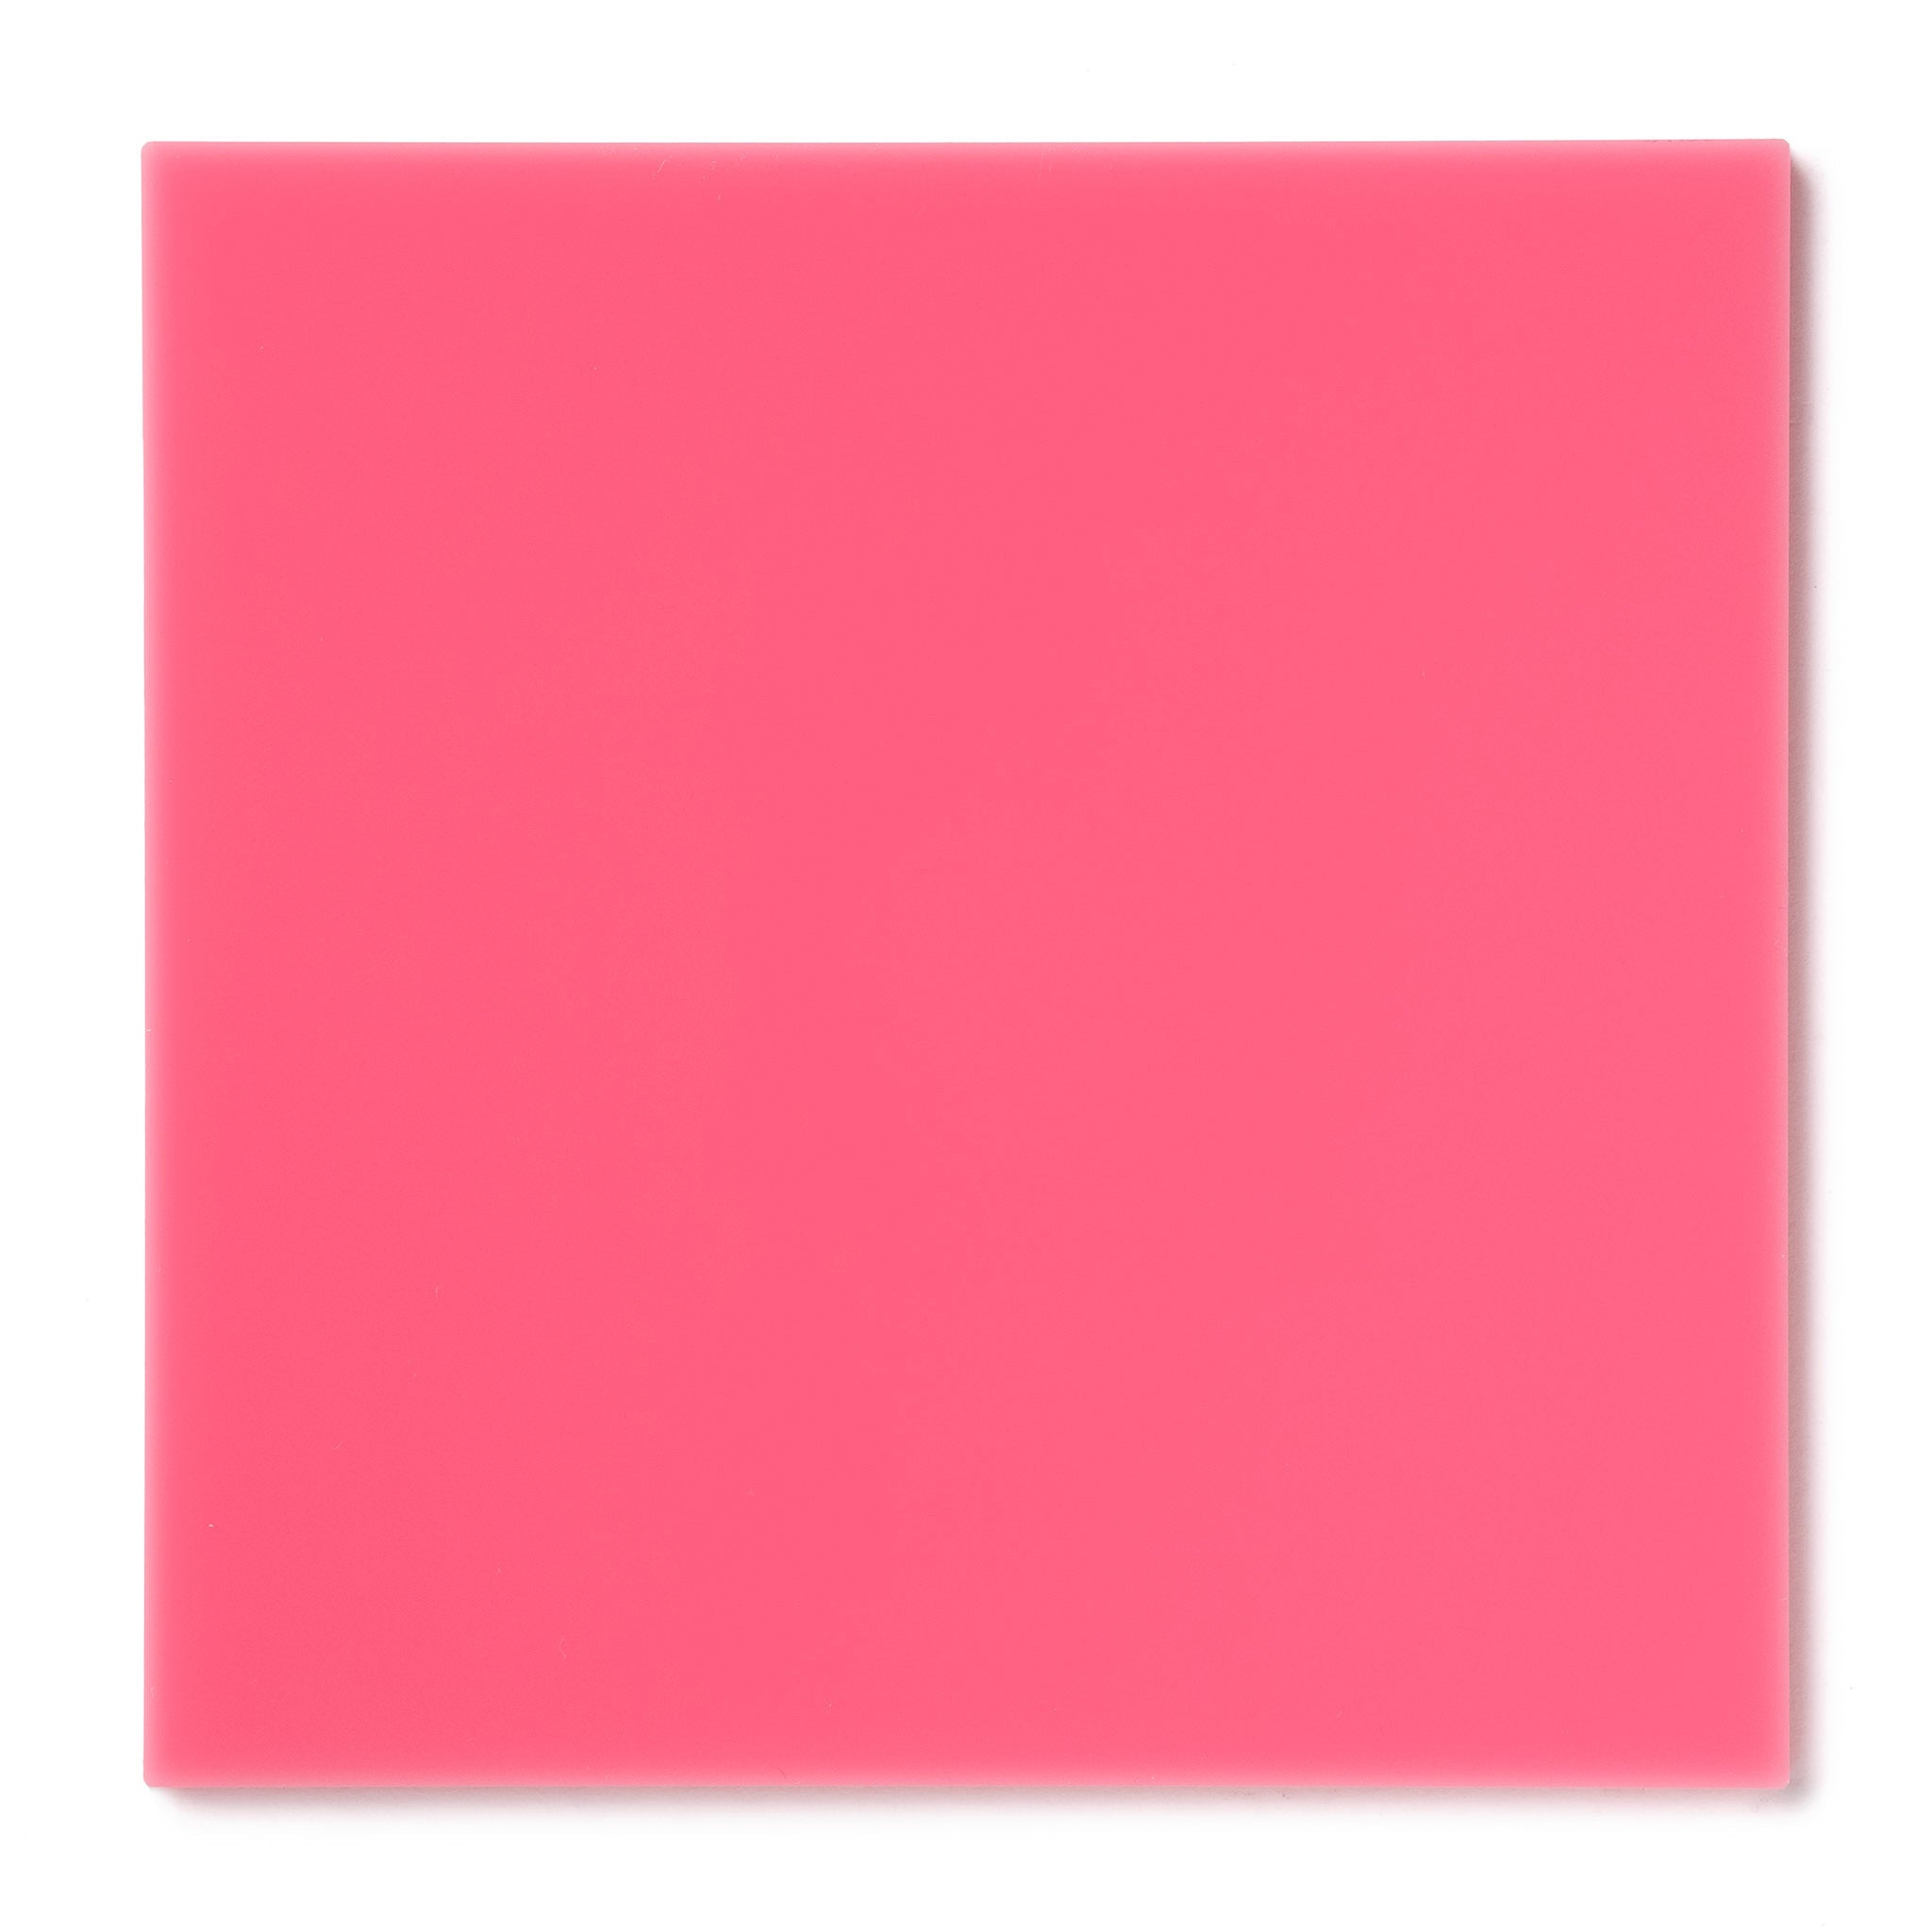 Acrylic Cast Sheet - Pink (3199) - 12 x 12 x 3 MM (0.12) Thick (Nominal)